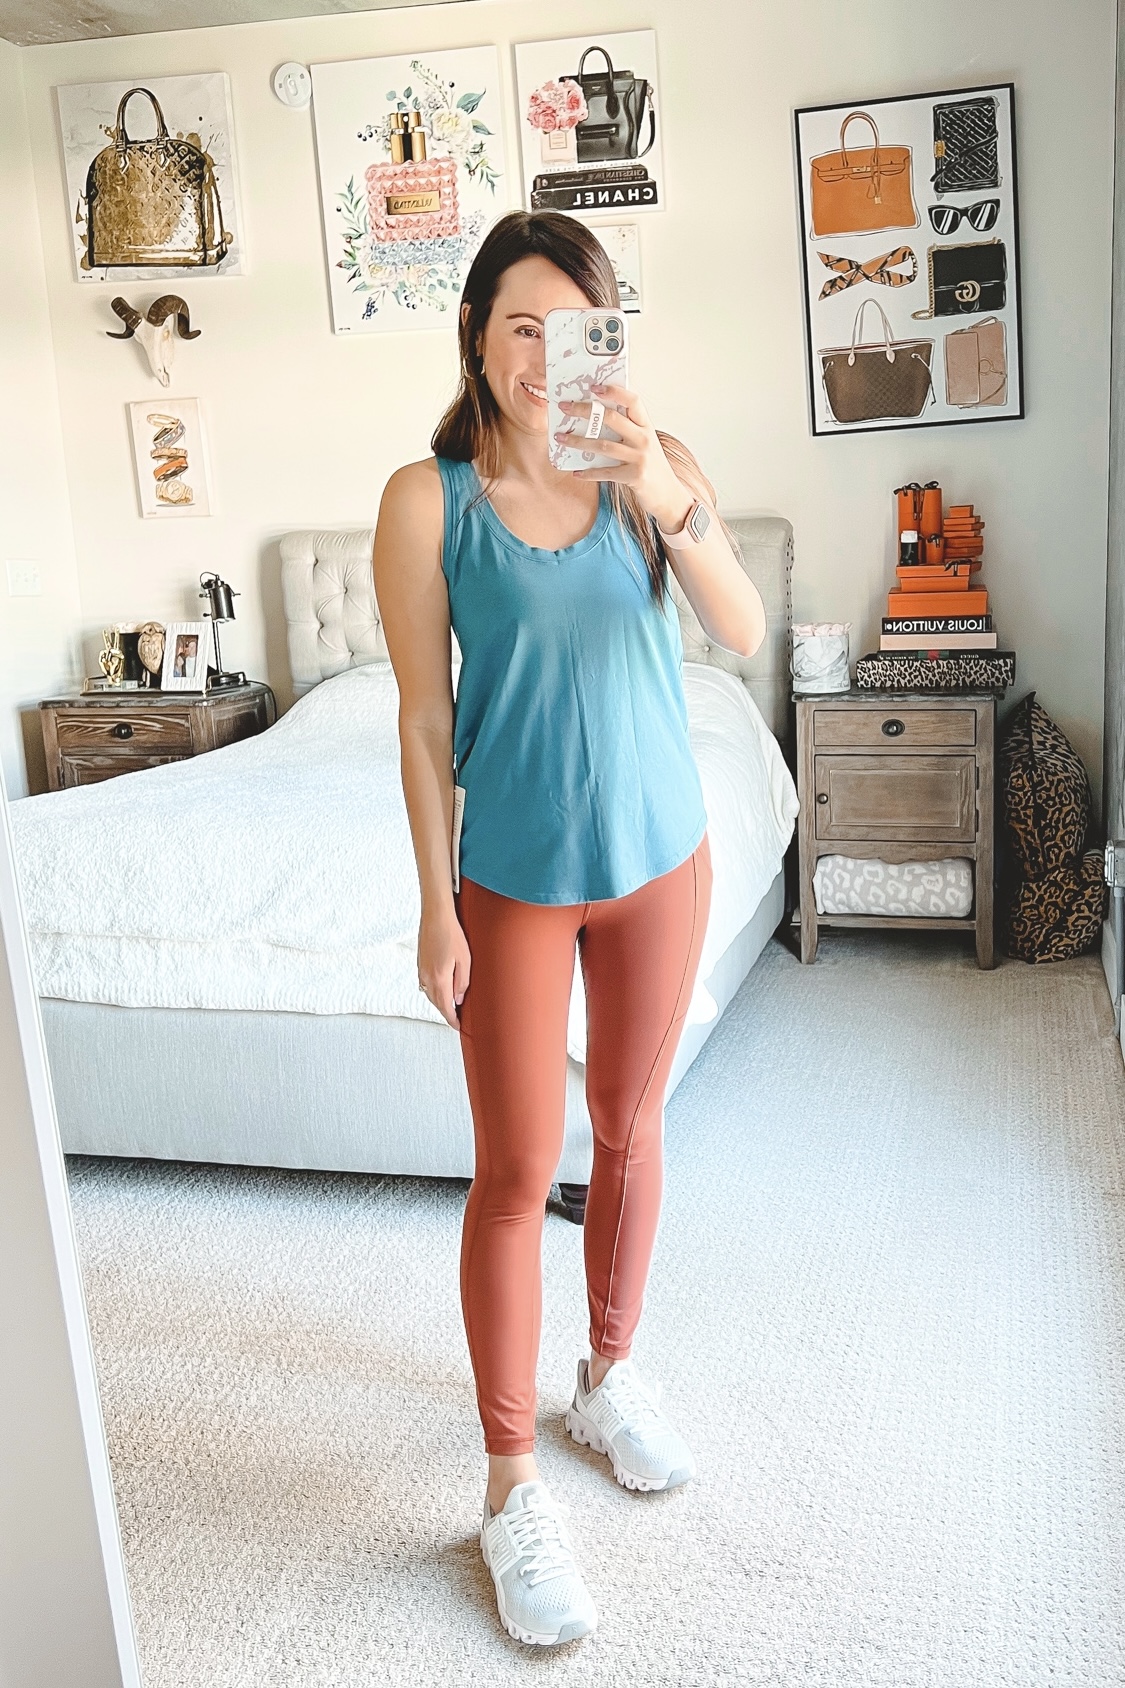 Fit Review Friday! Reveal Tight Zen Expression, Sculpt Tank, Love Knot Bra